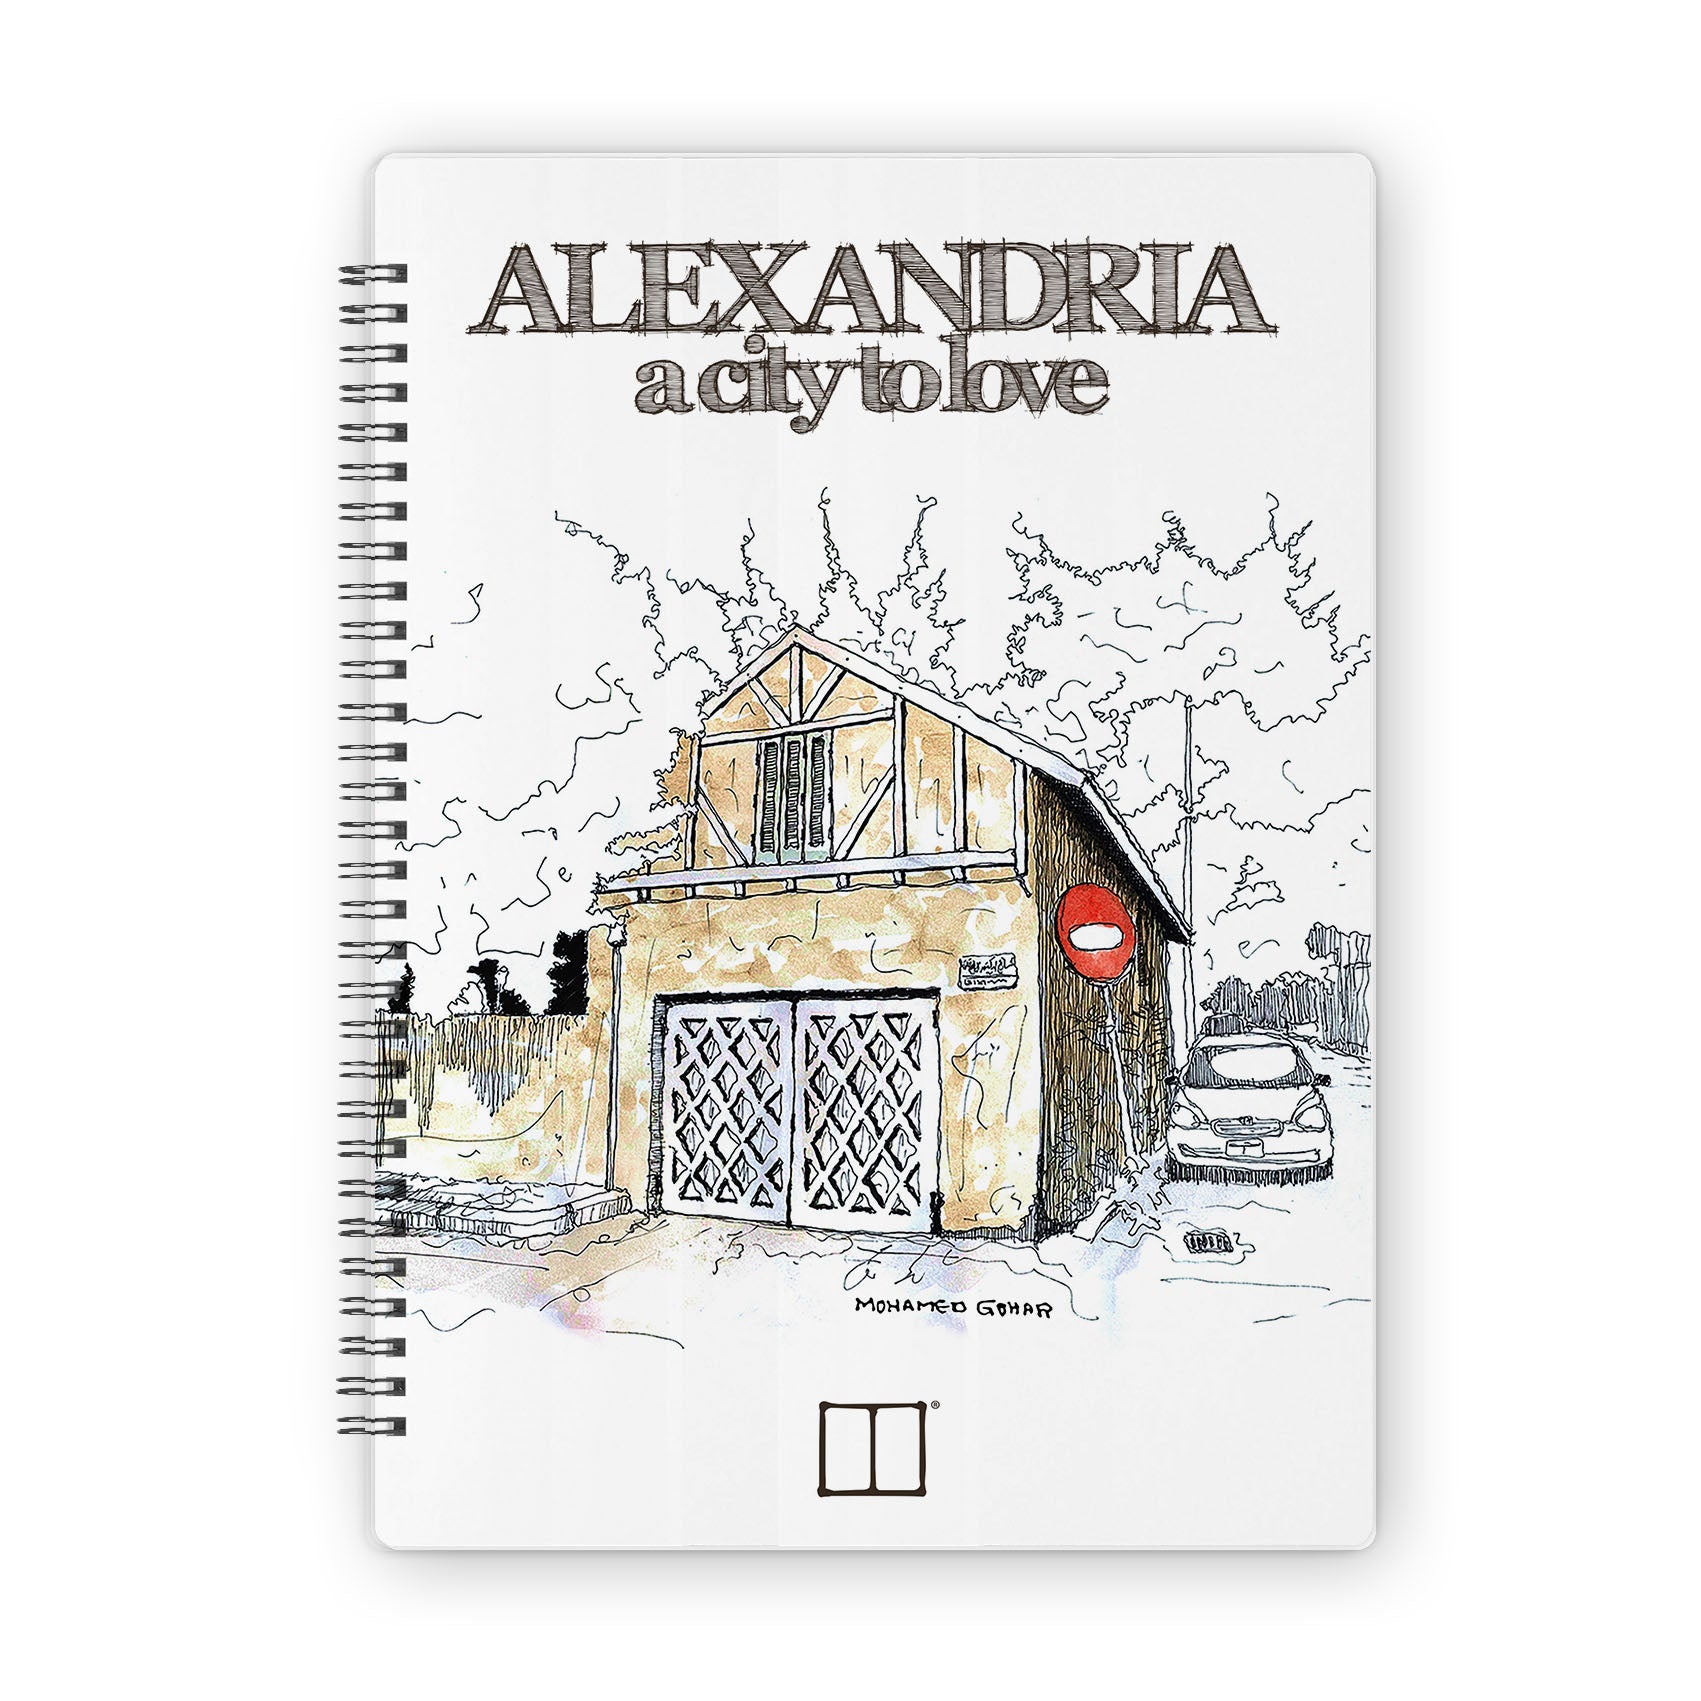 Sketchbook | 28 X 20 cm - (Alexandria a city to love) - 07 - from SketchBook Stationery